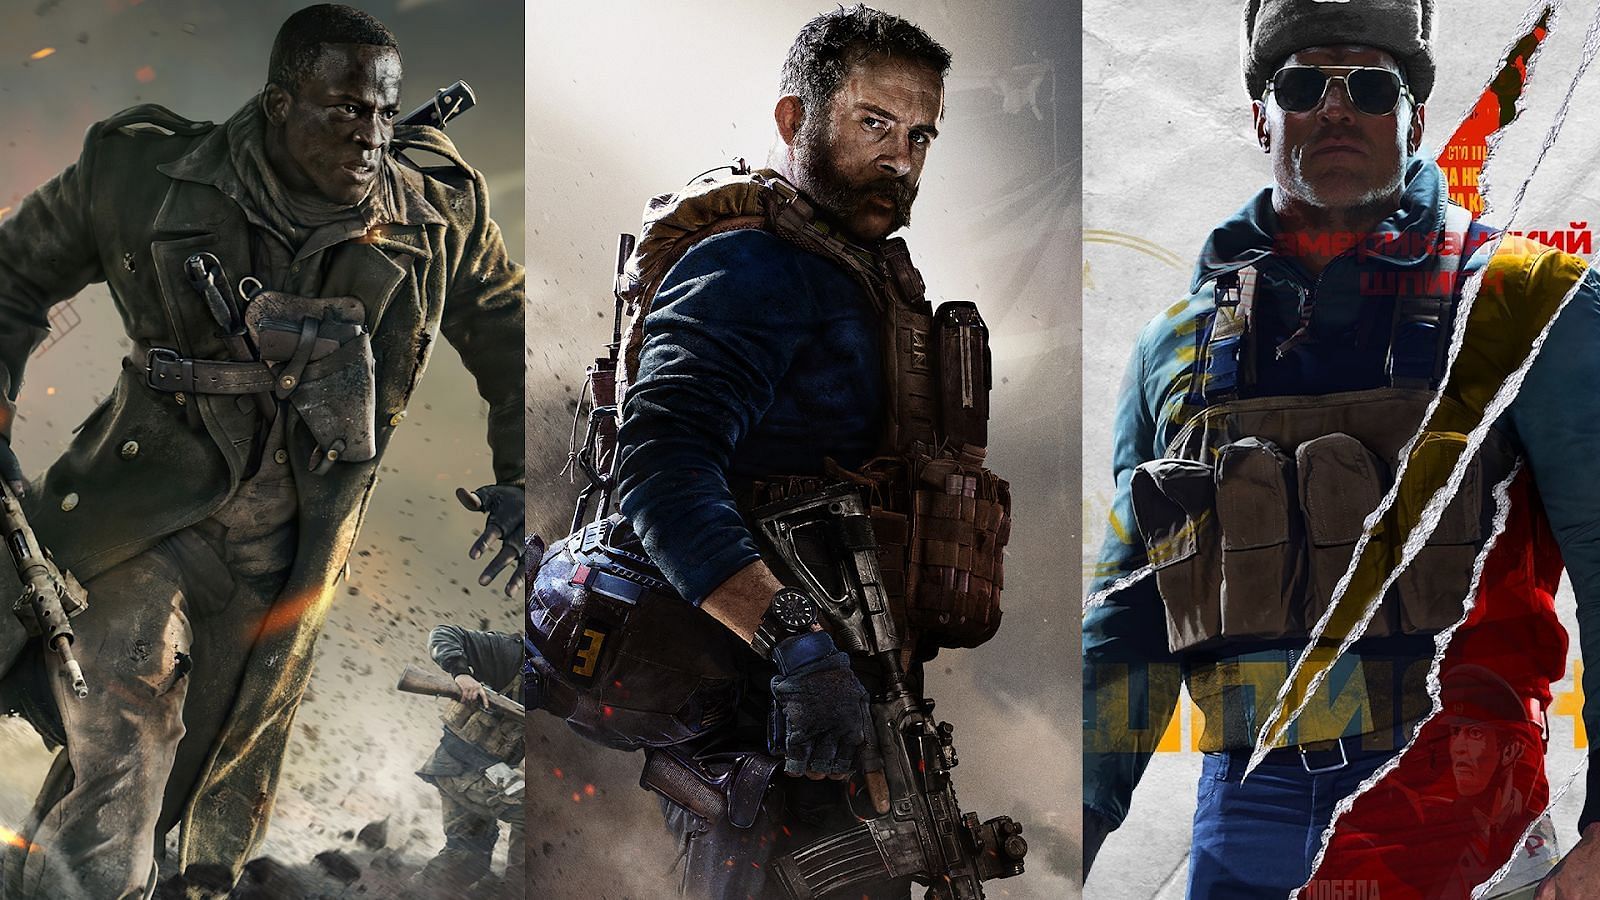 (From left) Call of Duty: Vanguard, Call of Duty: Modern Warfare, Call of Duty: Black Ops Cold War (Image by Activision)